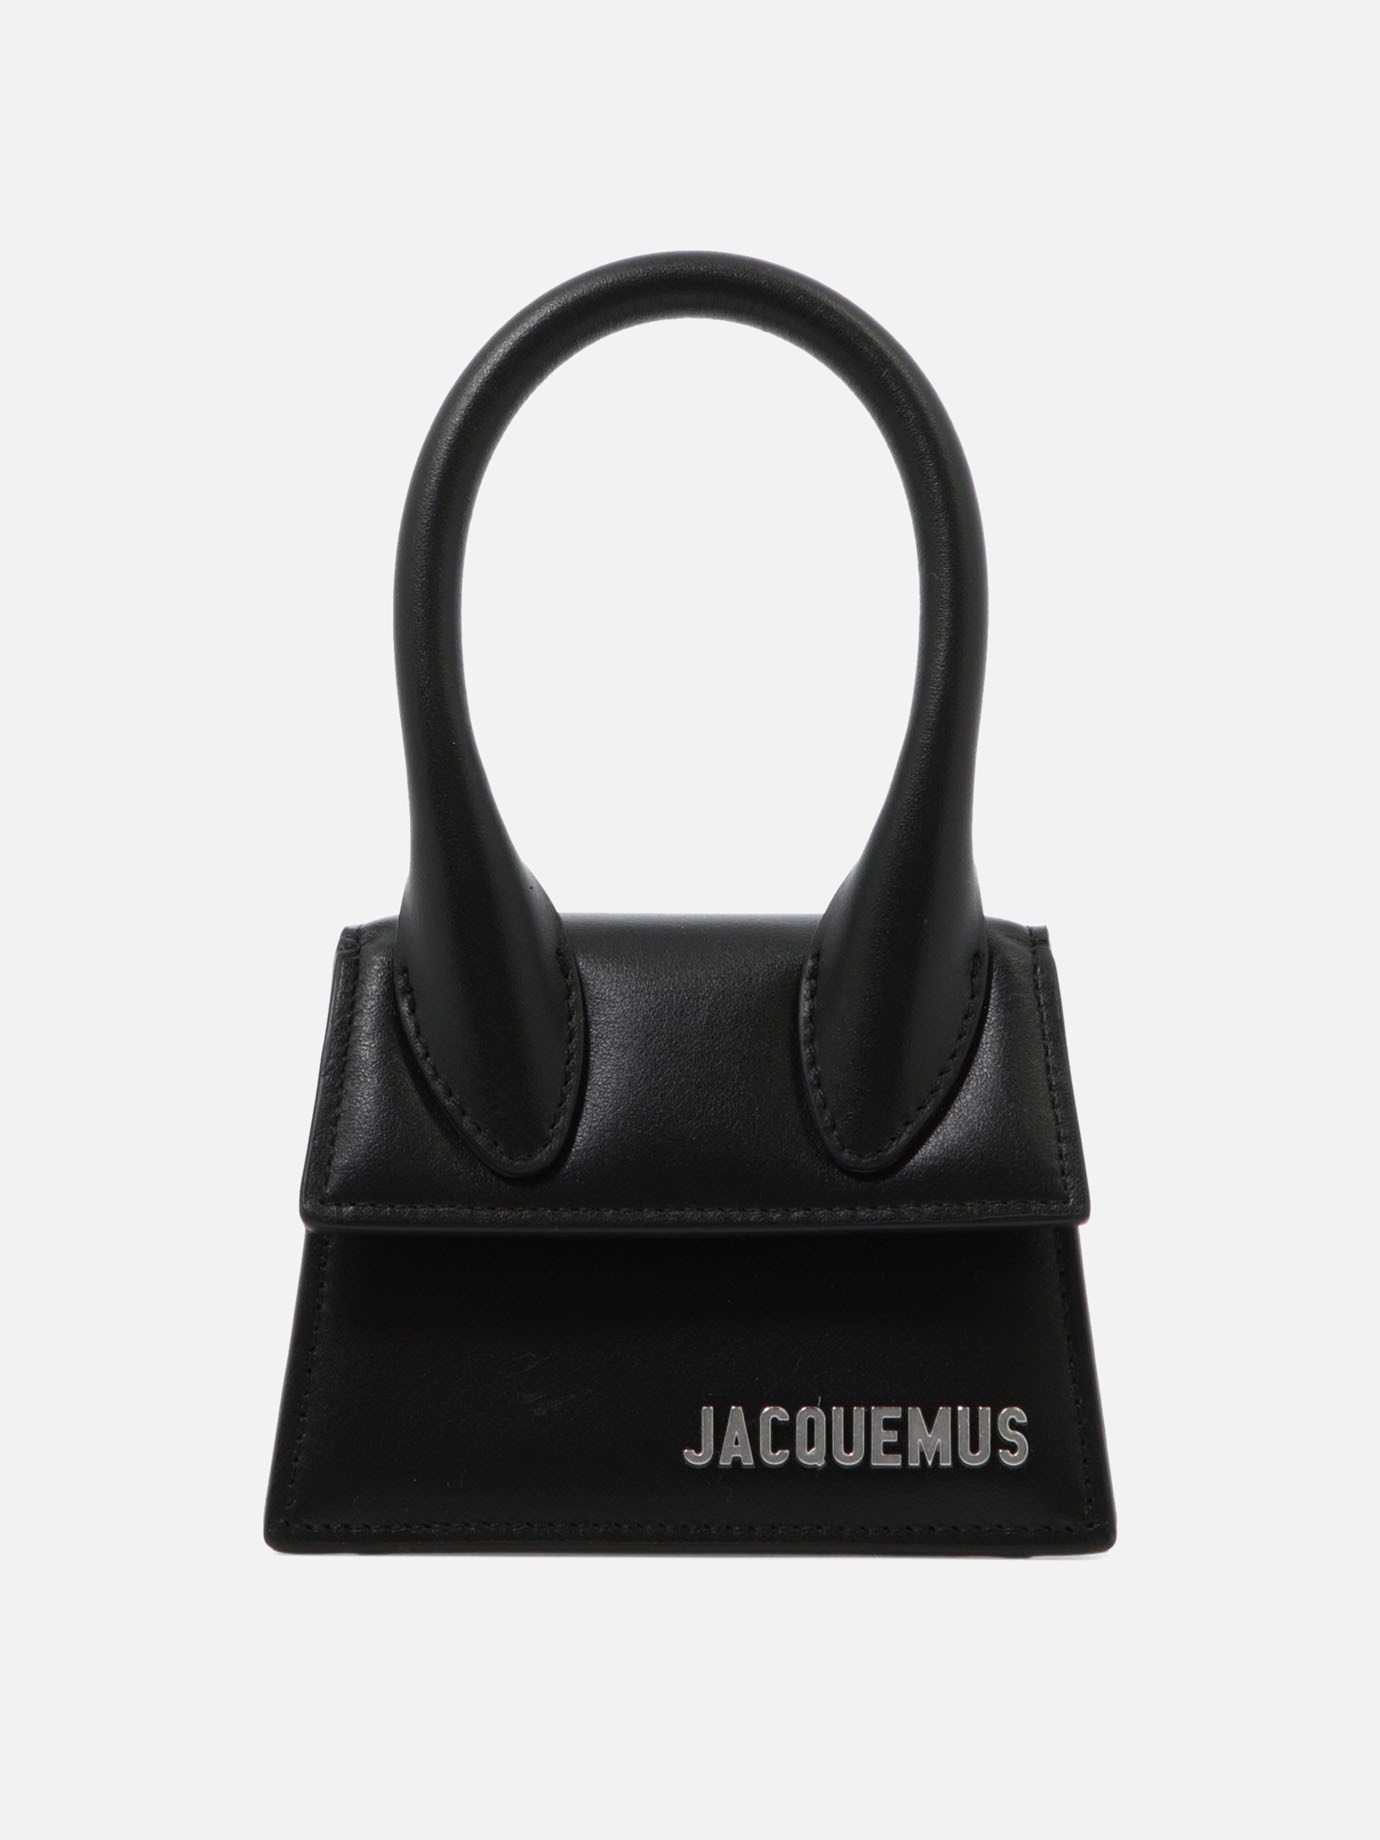  Le Chiquito Homme  handbagby Jacquemus - 4